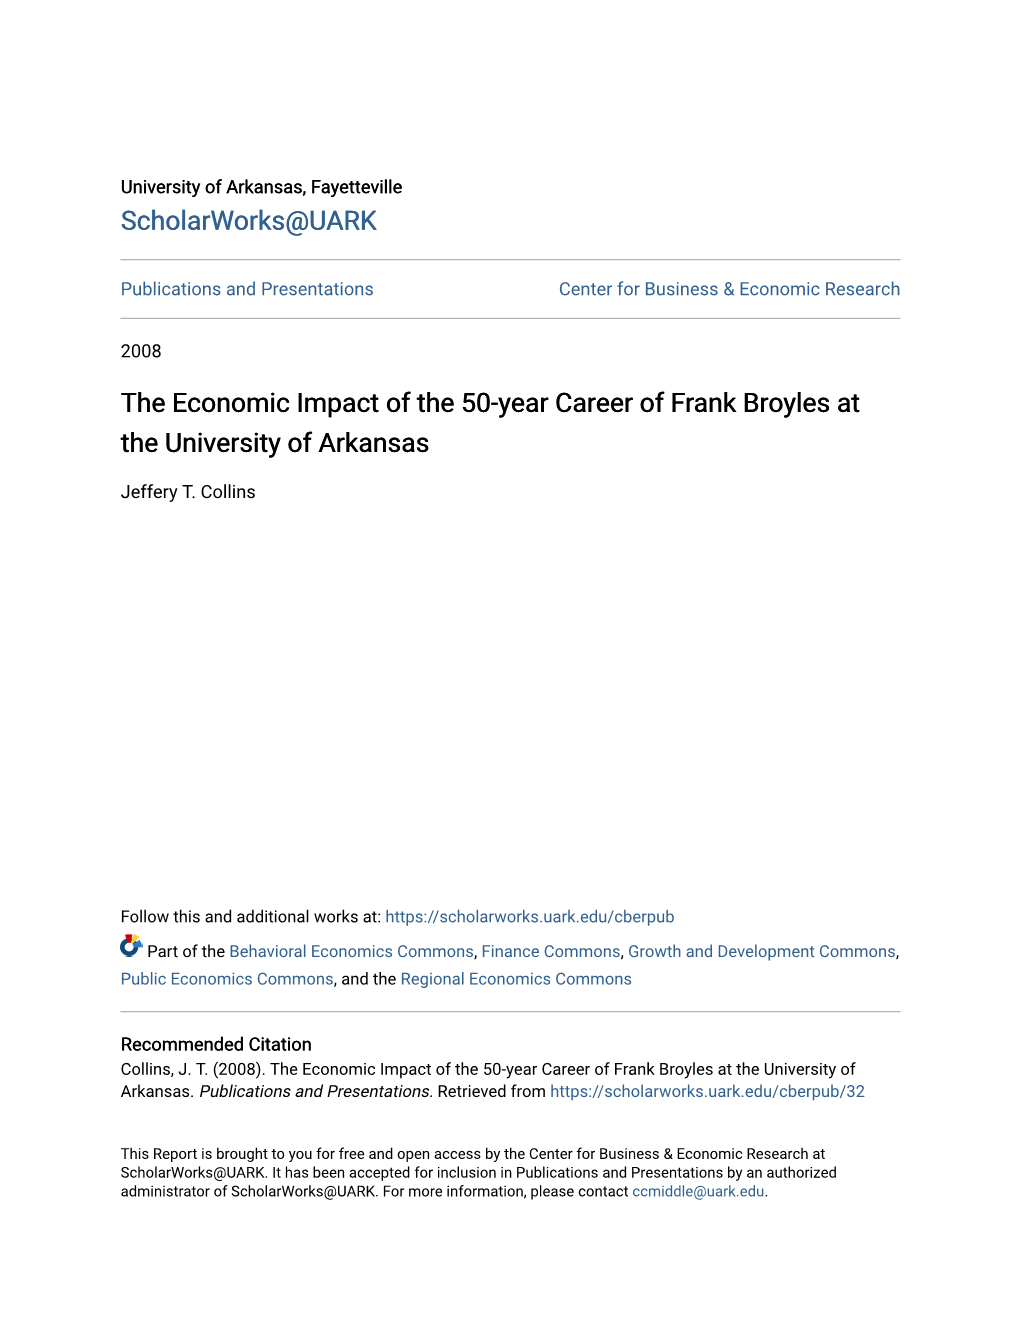 The Economic Impact of the 50-Year Career of Frank Broyles at the University of Arkansas